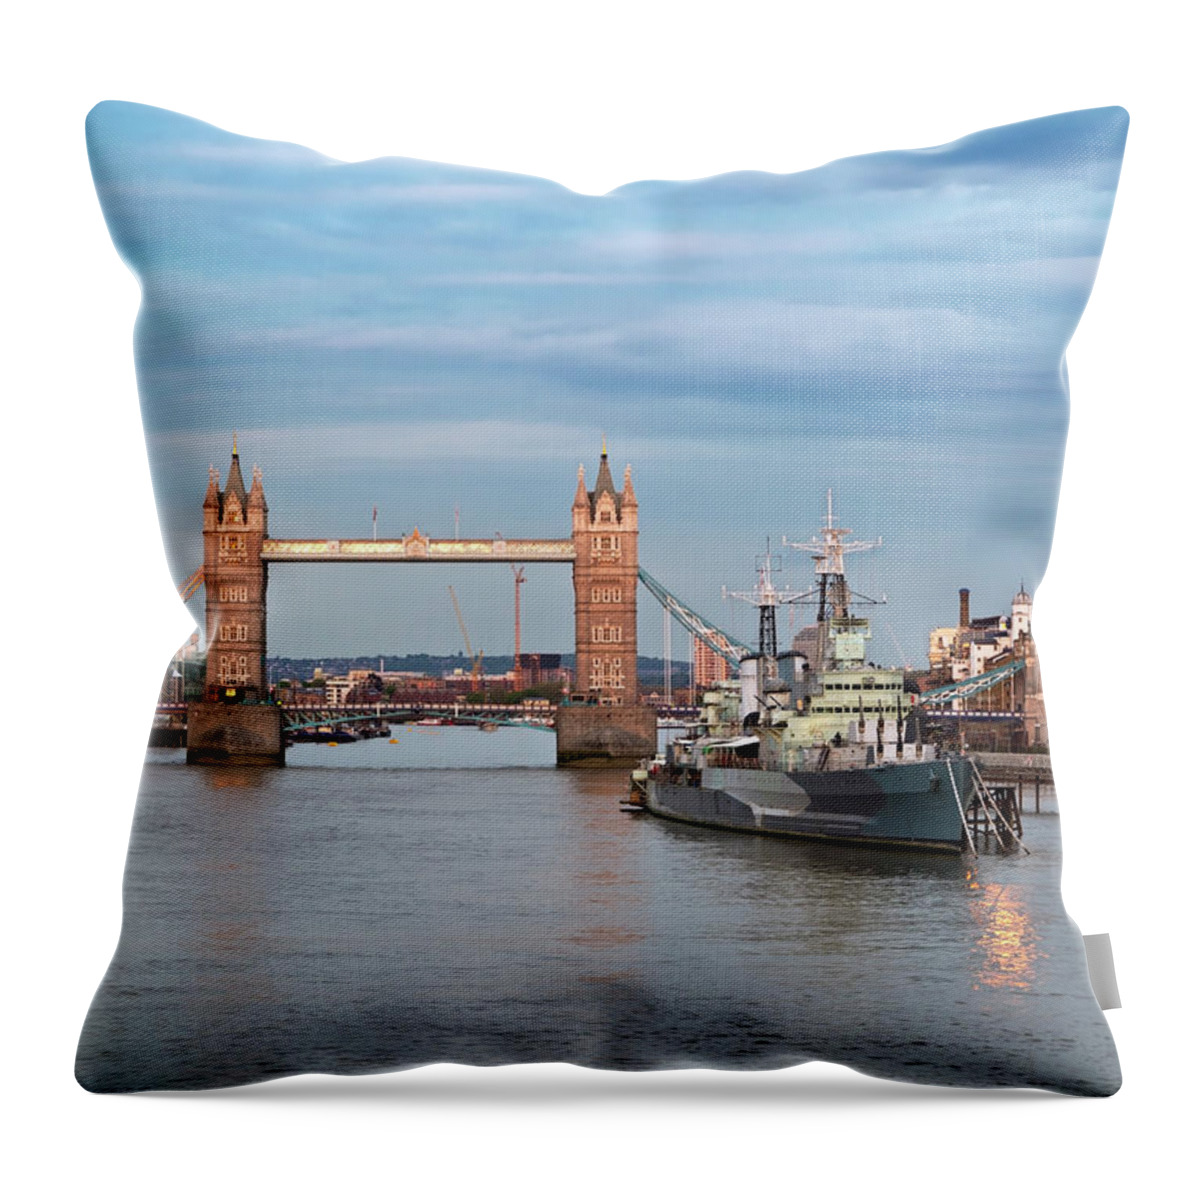 English Culture Throw Pillow featuring the photograph Tower Bridge by Daniel Sambraus